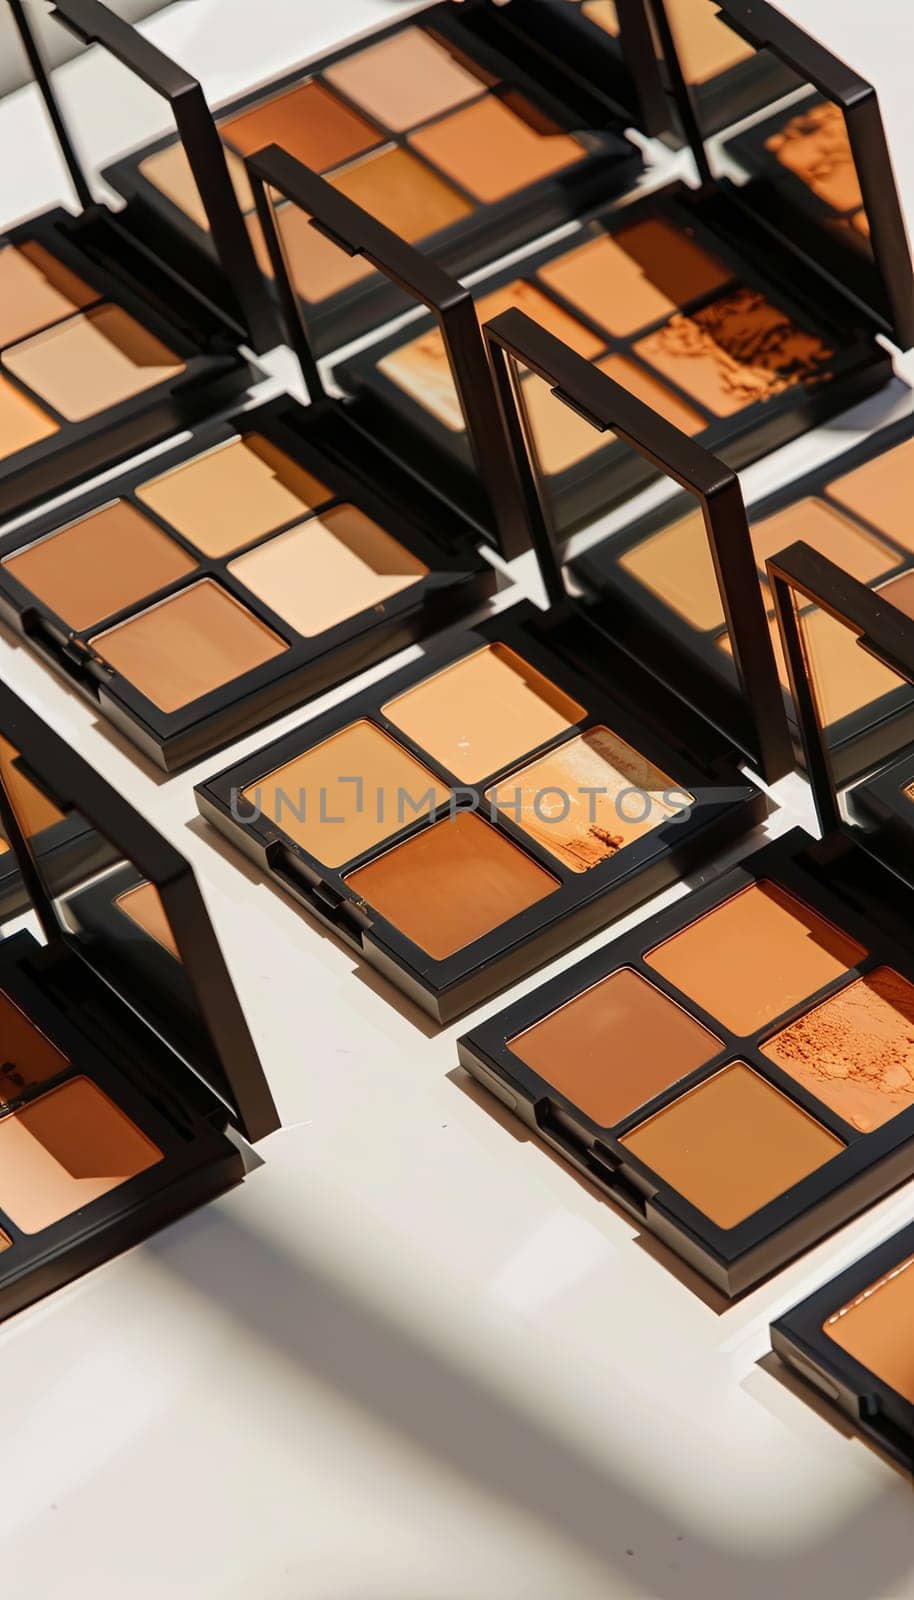 An assortment of contouring palettes and highlighters arranged neatly on a light background.